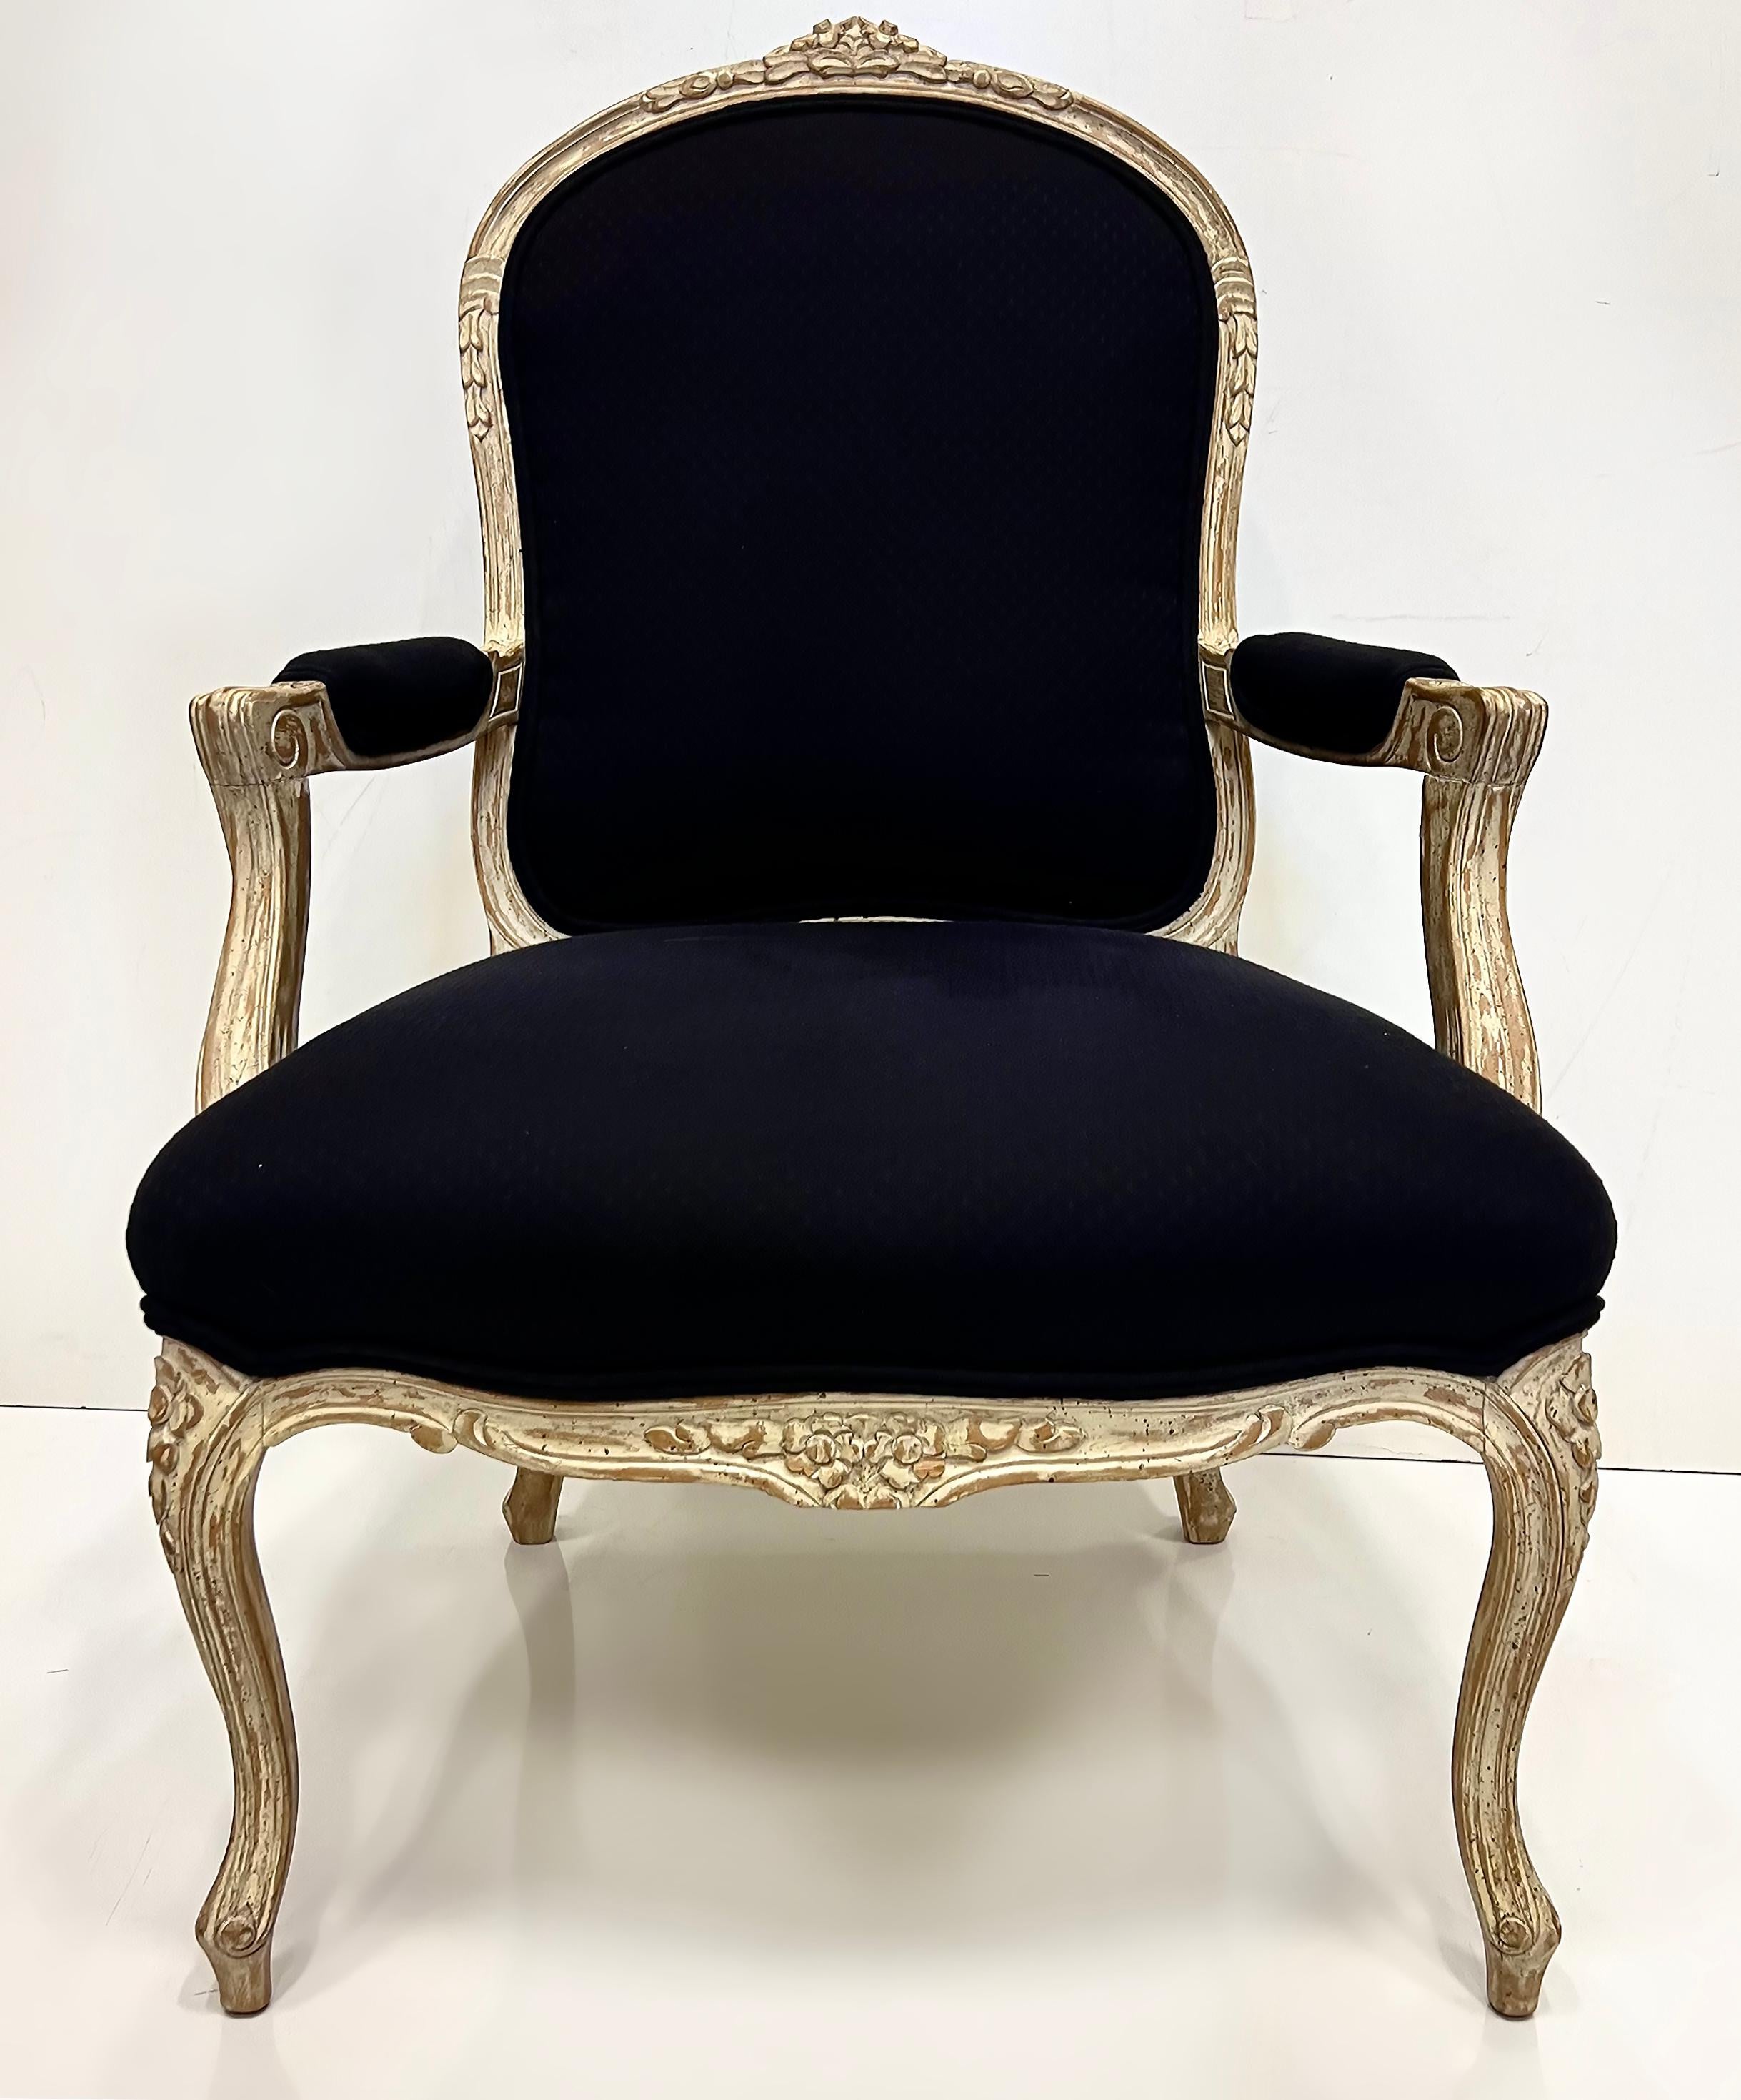 Substantial Vintage Louis XV Style Fauteuil Chairs, Large Scale Pair

Offered for sale is a pair of vintage 20th-century Louis XV-style open fauteuil armchairs.  The chairs are well made and have a large scale. Additionally, they are quite heavy.